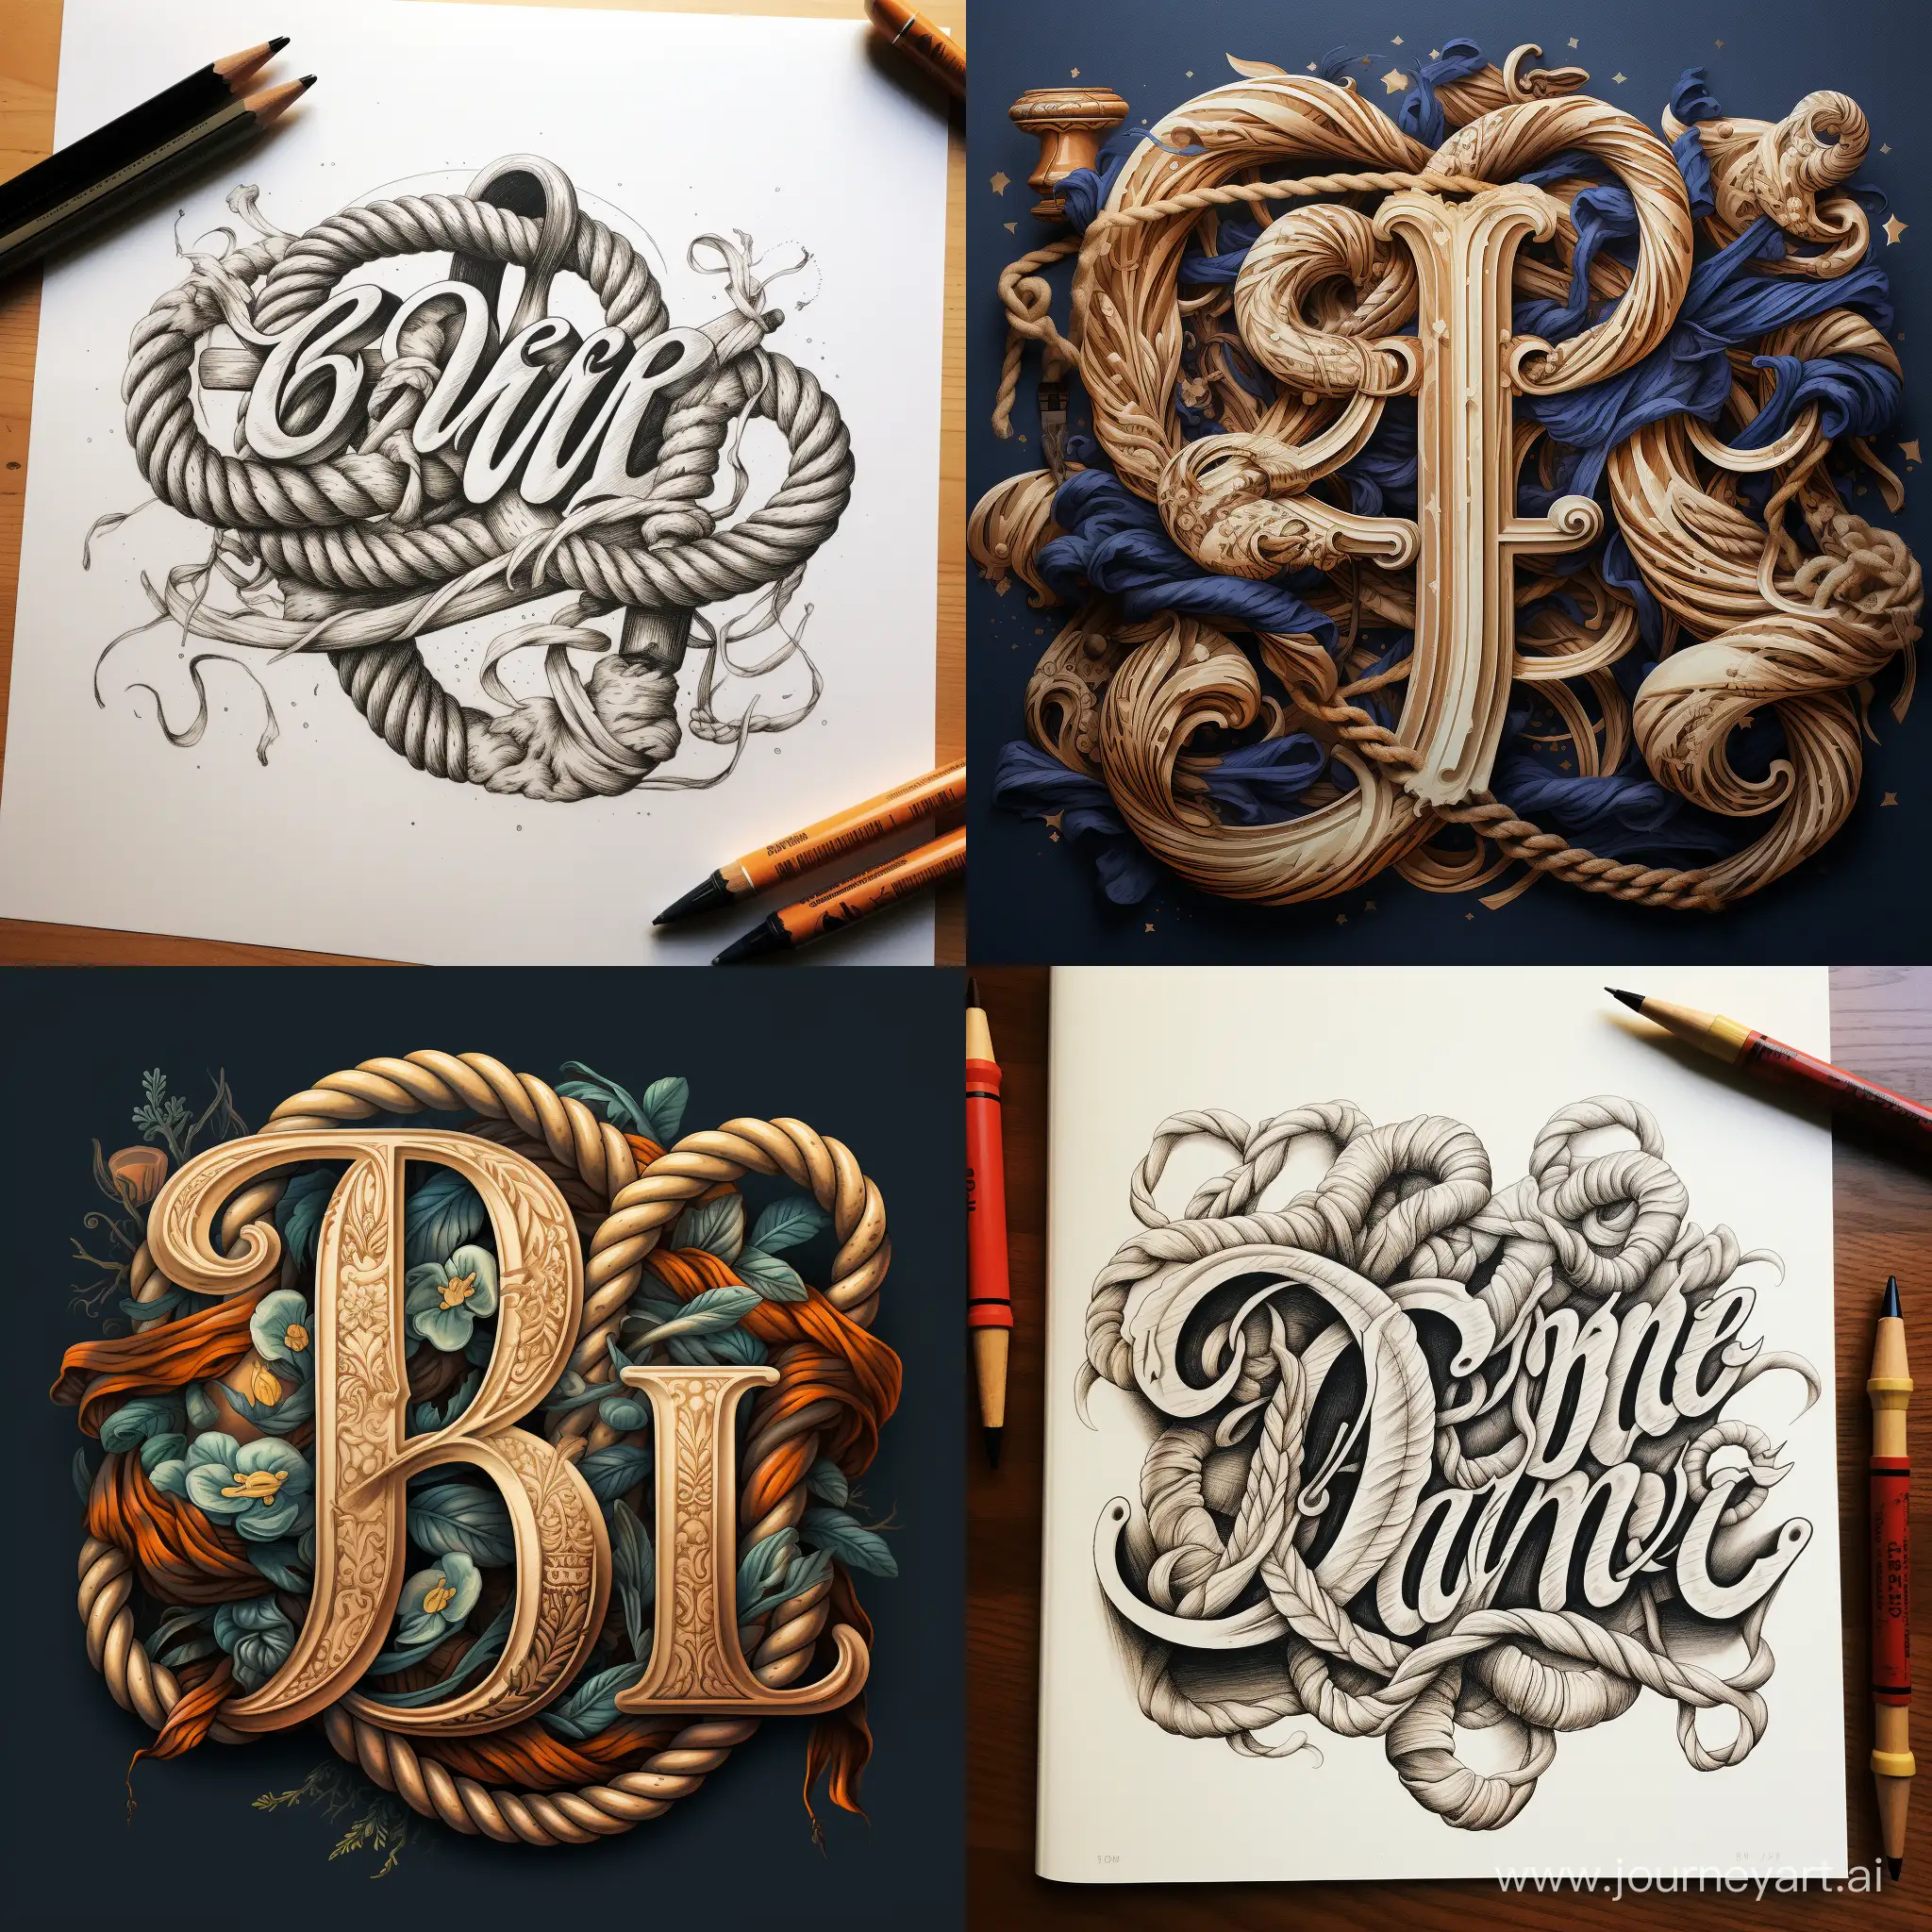 Creative-Lettering-with-Rope-Artistic-11-Aspect-Ratio-Design-No-58313